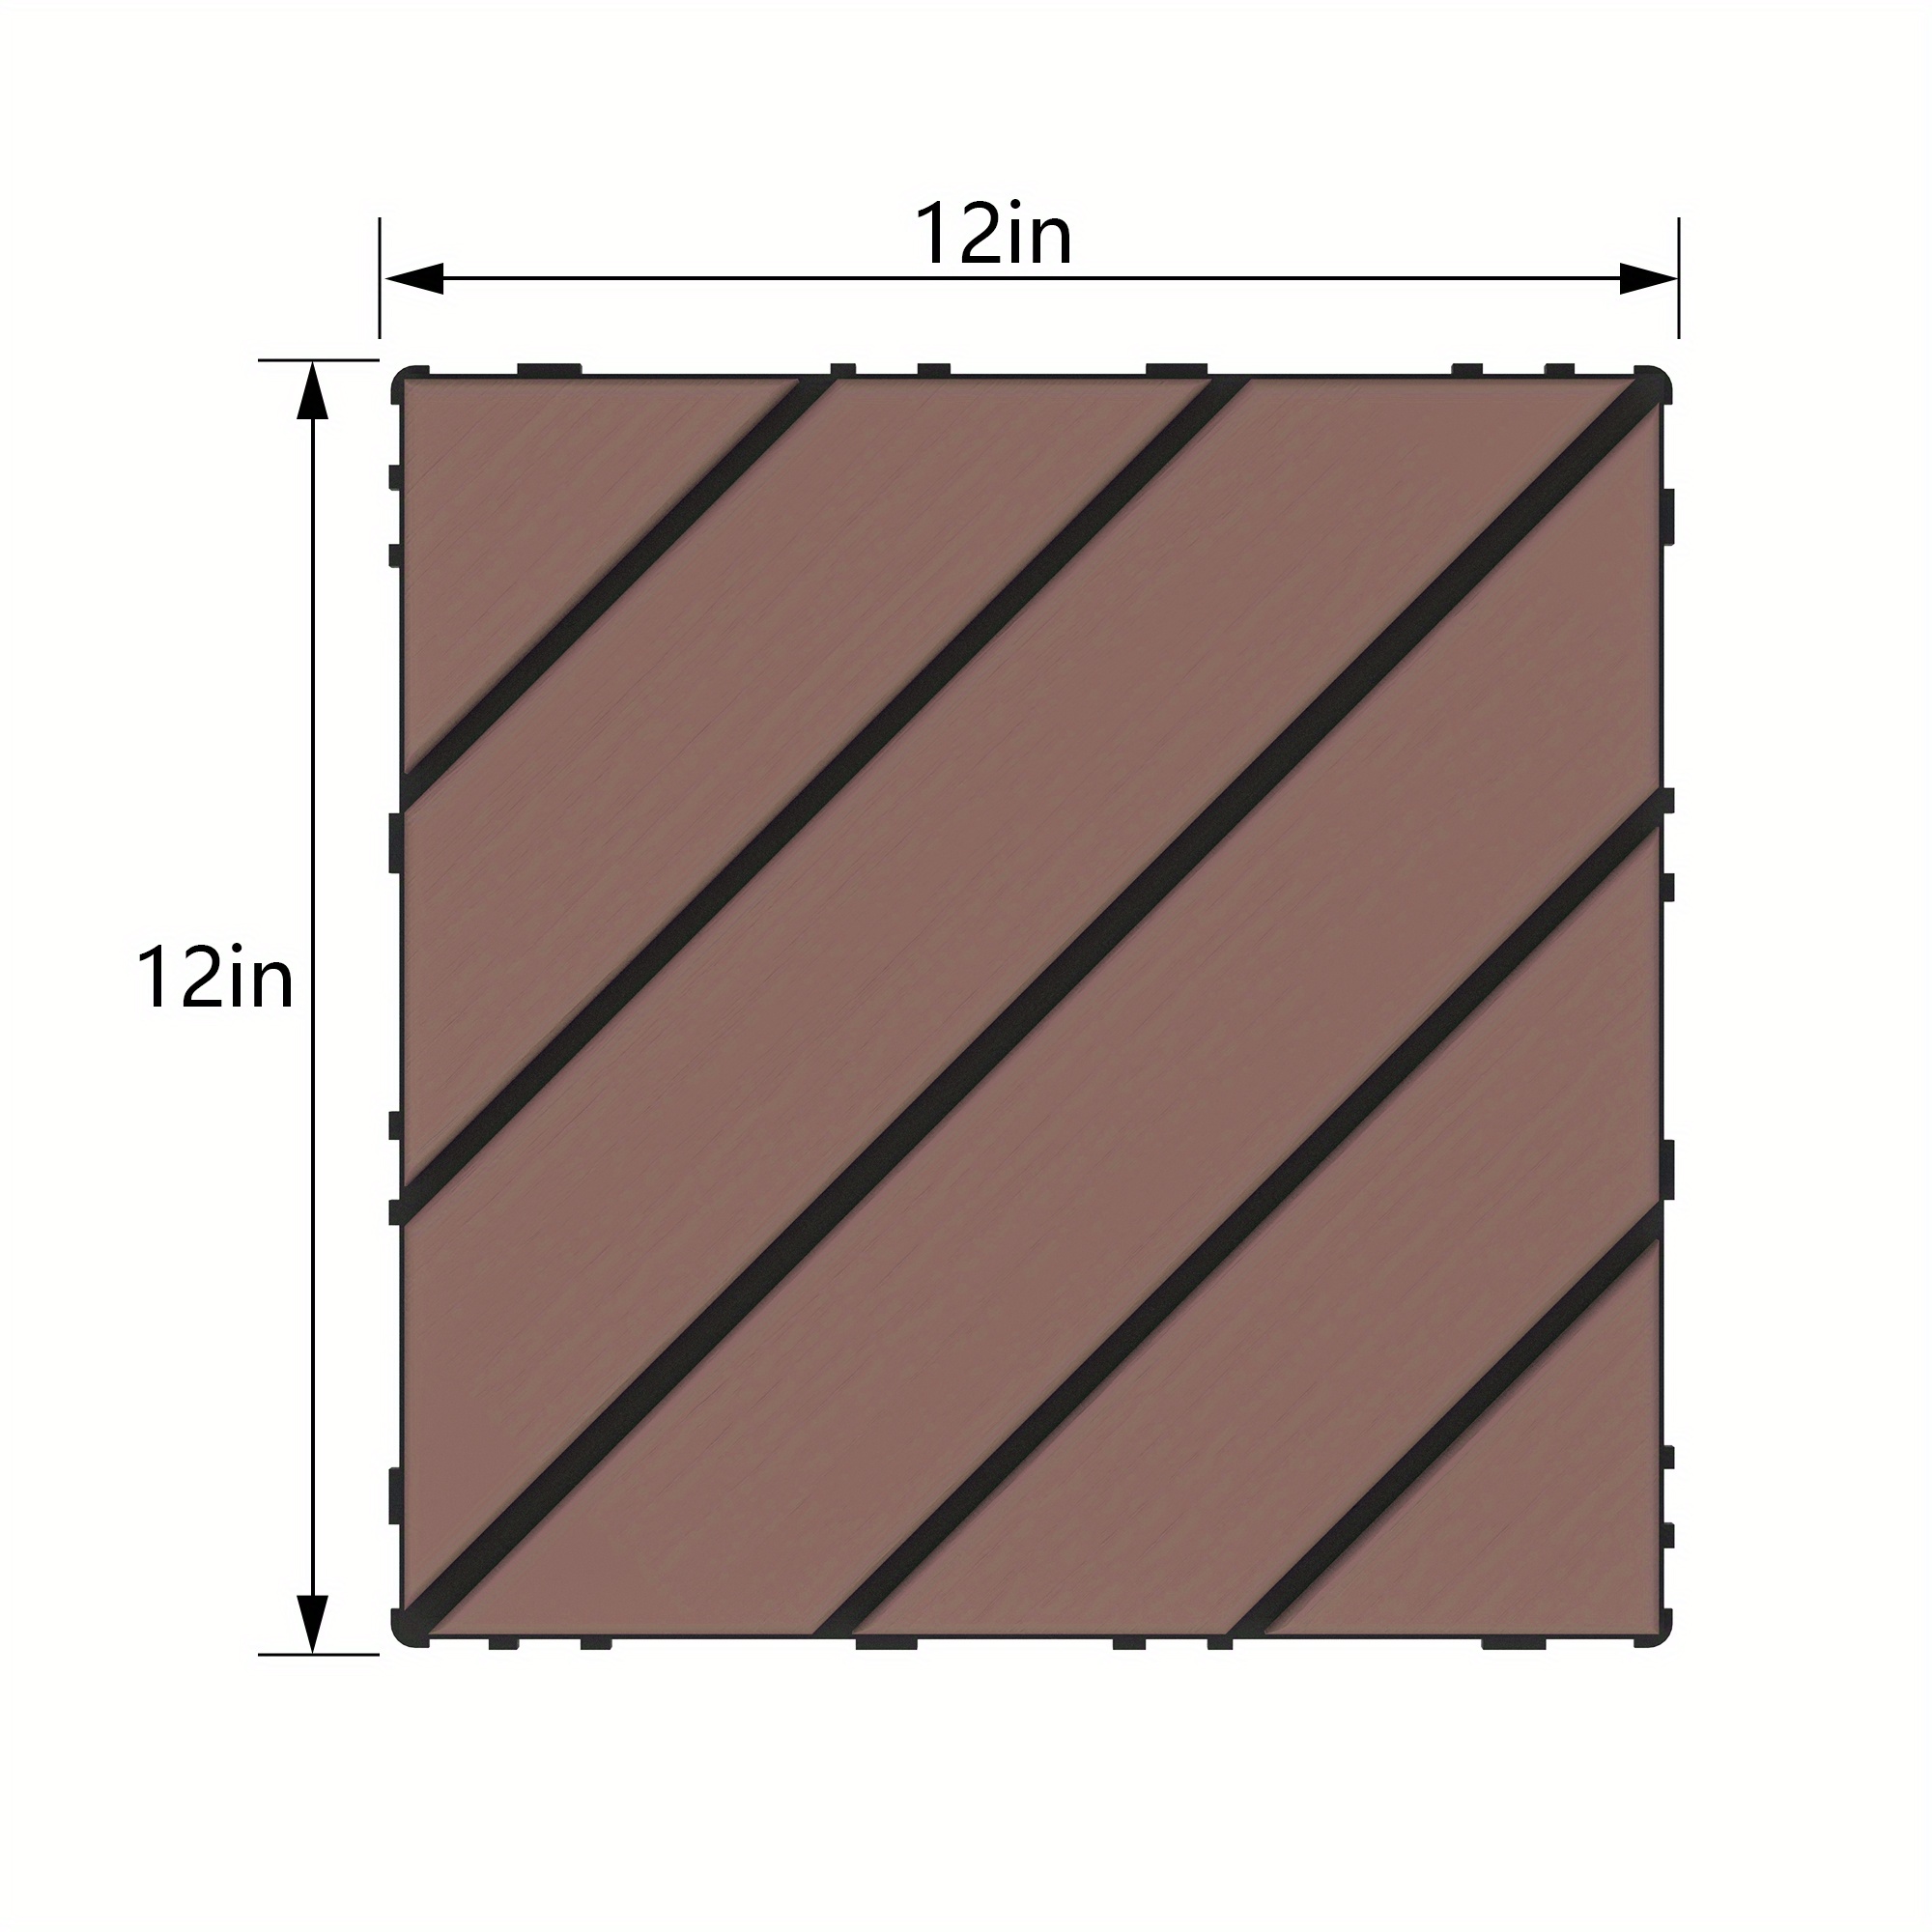 

Plastic Interlocking Deck Tiles, 44 Pack Patio Deck Tiles, 12"x12" Square Waterproof Outdoor All Weather Use, Patio Decking Tiles For Poolside Balcony Backyard, Brown/grey